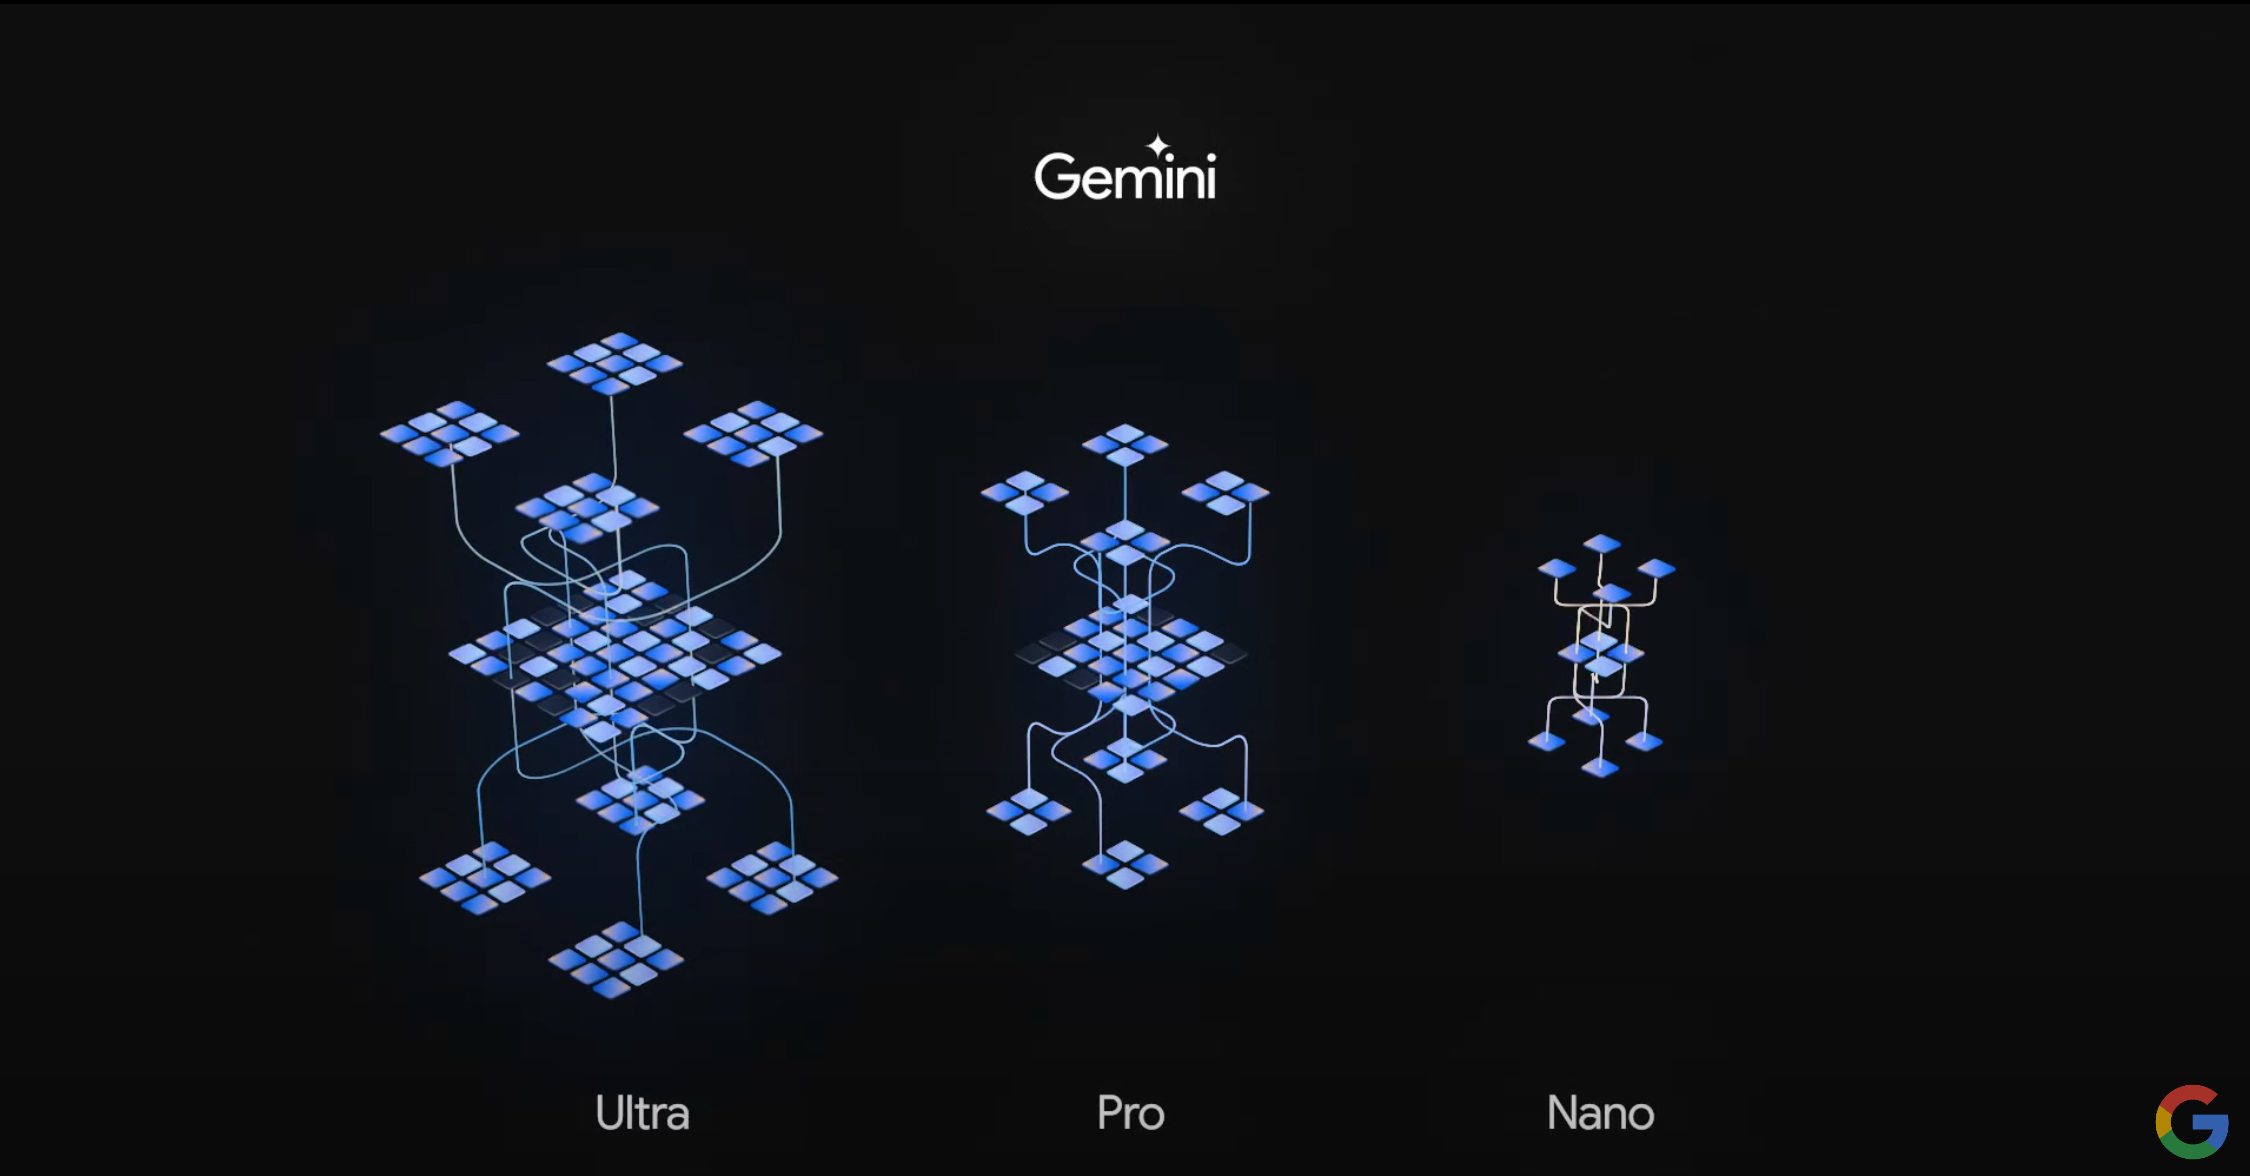 Google presentation with blue illustration showing the three versions of Gemini and their complexity.